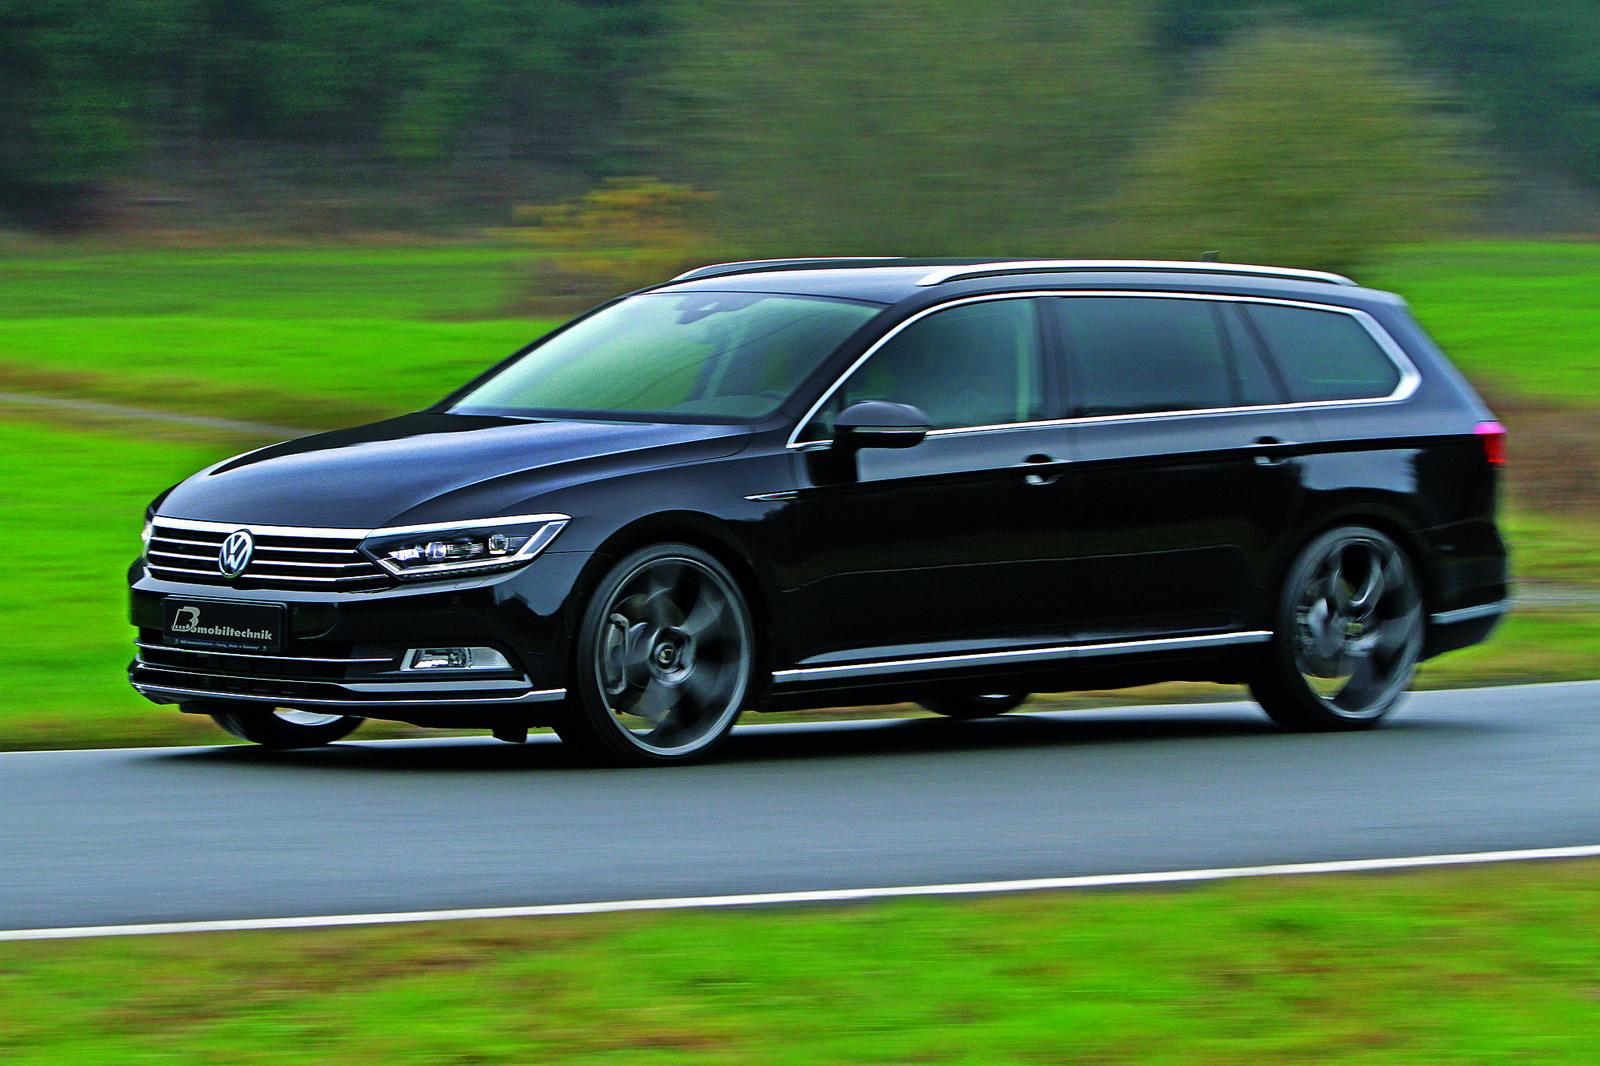 beheerder worm Onschuld B&B Injects 300 HP into VW Passat Variant 2.0 BiTDI | Carscoops